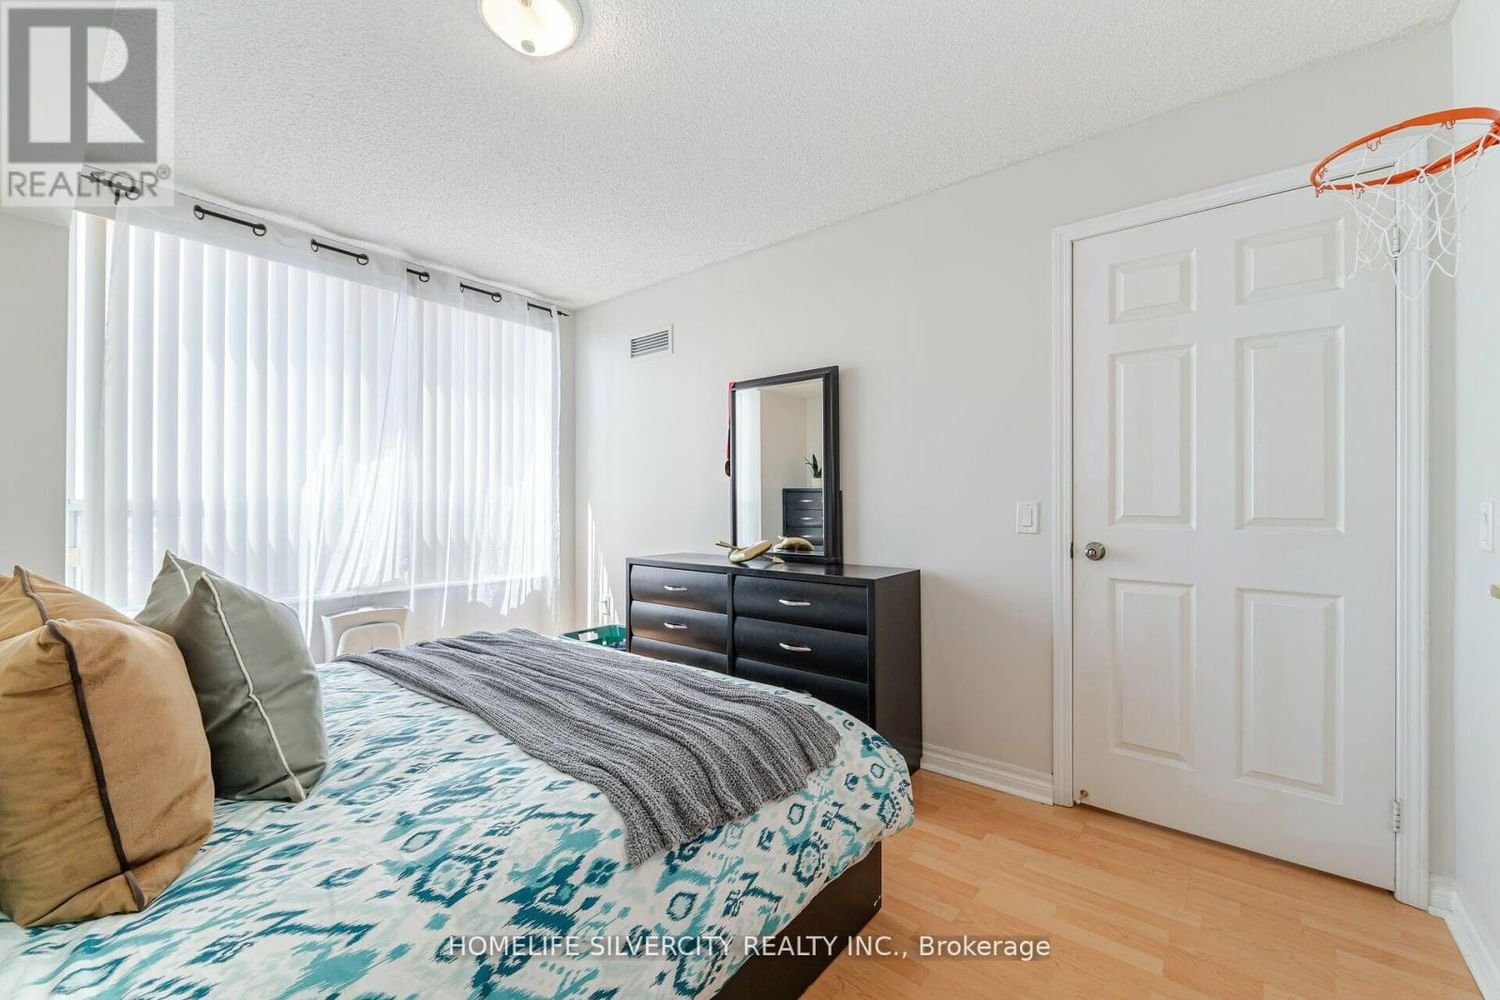 1210 - 55 STRATHAVEN DRIVE Image 13